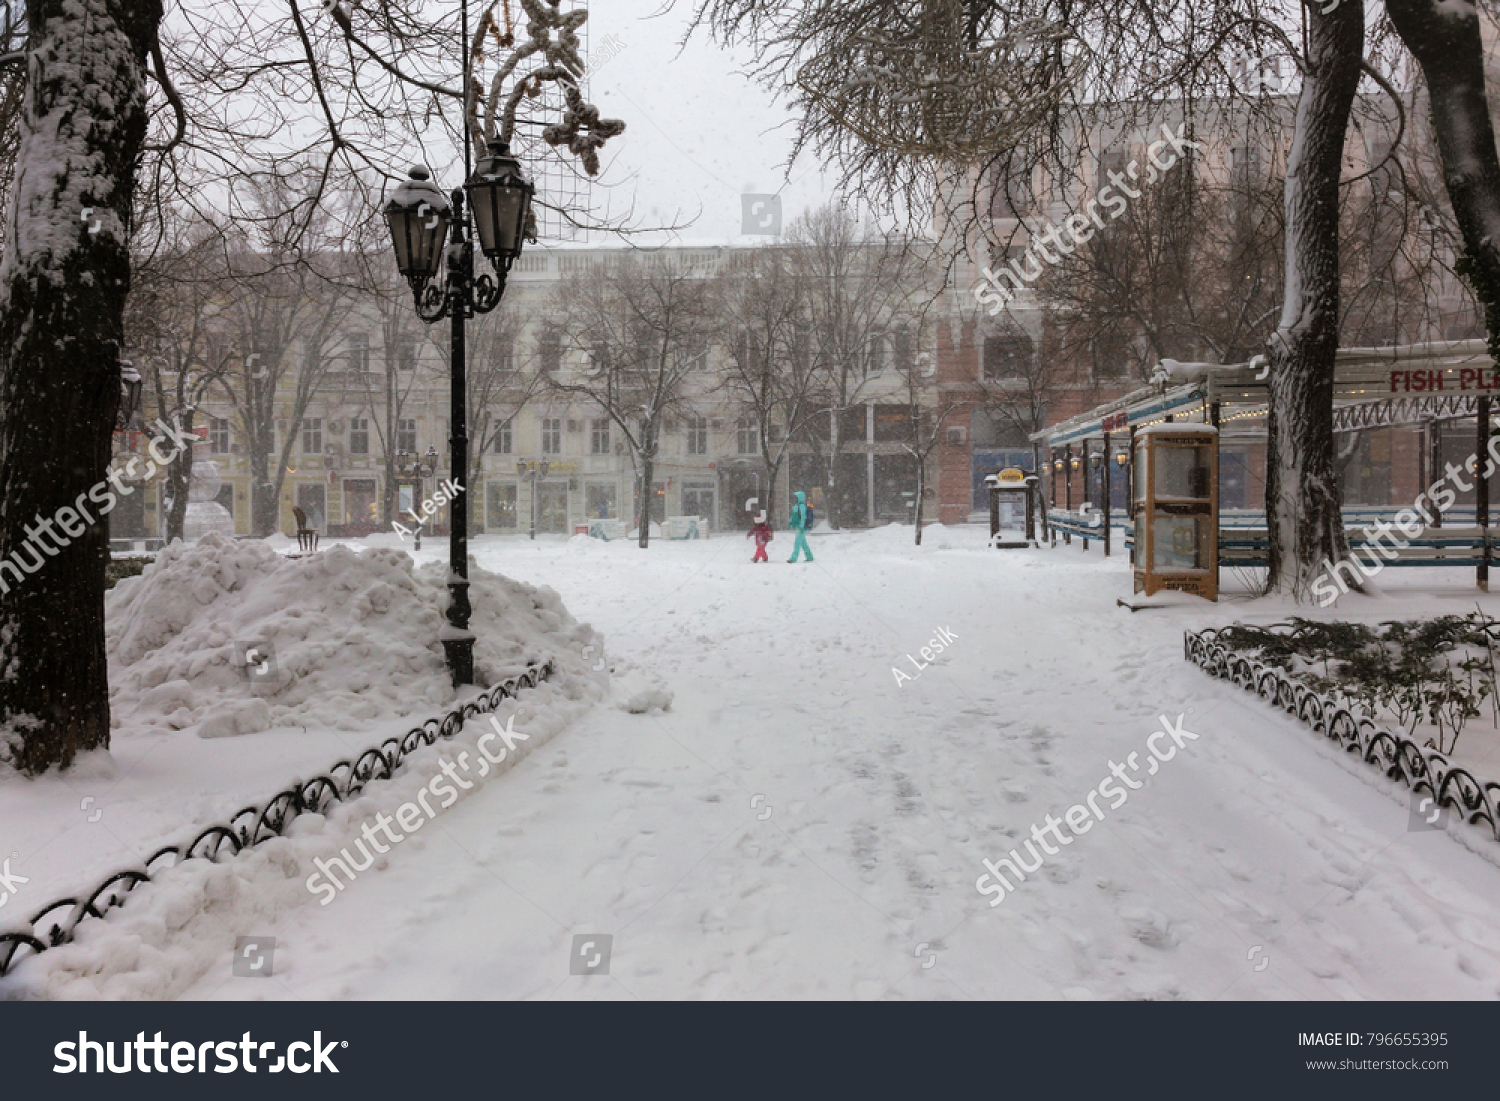 ODESSA, UKRAINE-January 16, 2018: Strong snowfall, cyclone in city streets in winter. Cars are covered with snow. Slippery road. Bad weather in winter: heavy snow and snowstorm. Pedestrians go on snow #796655395